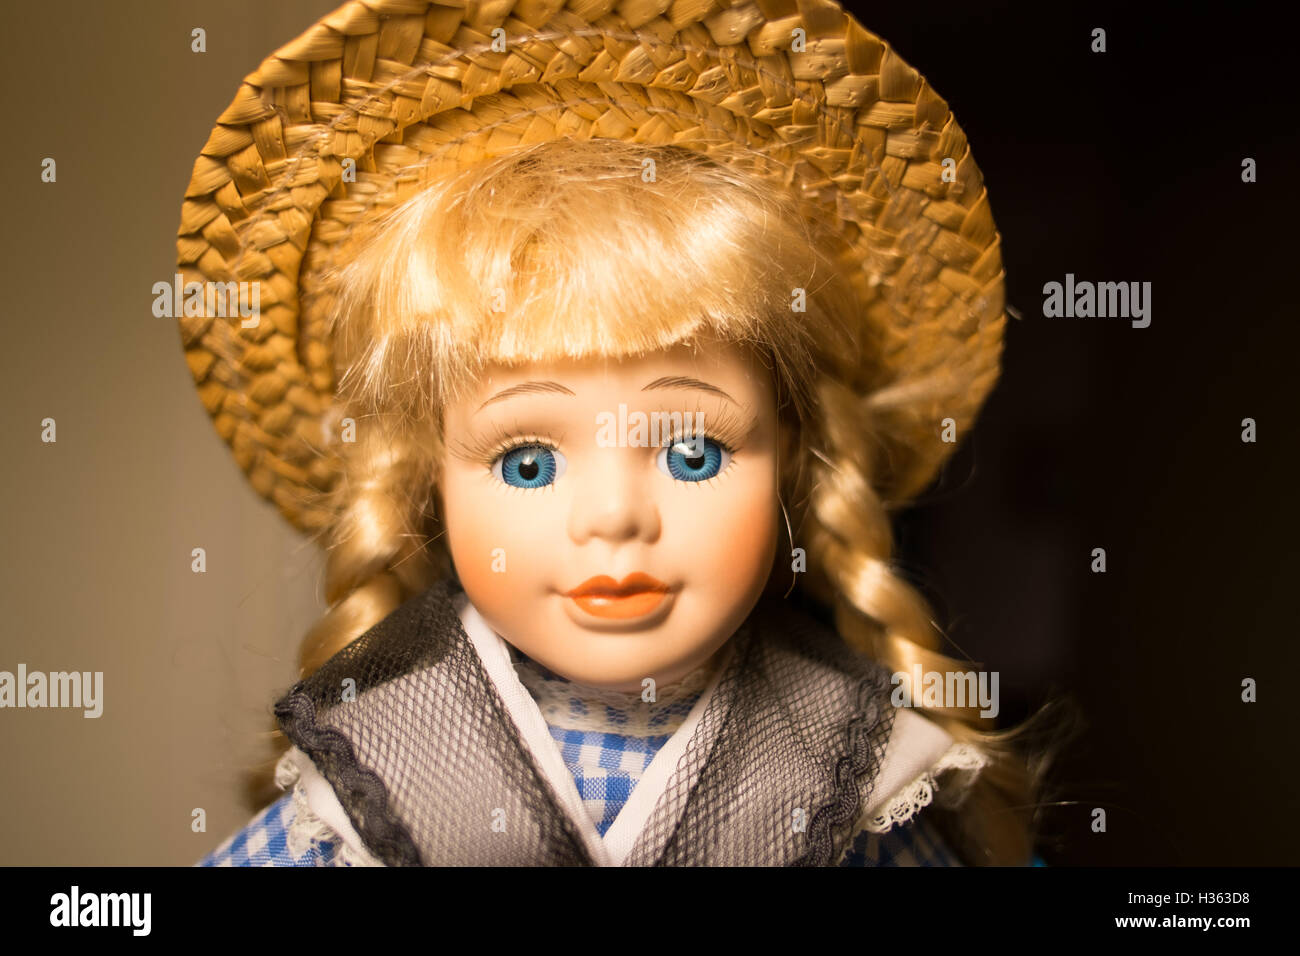 Blonde doll with straw hat Stock Photo